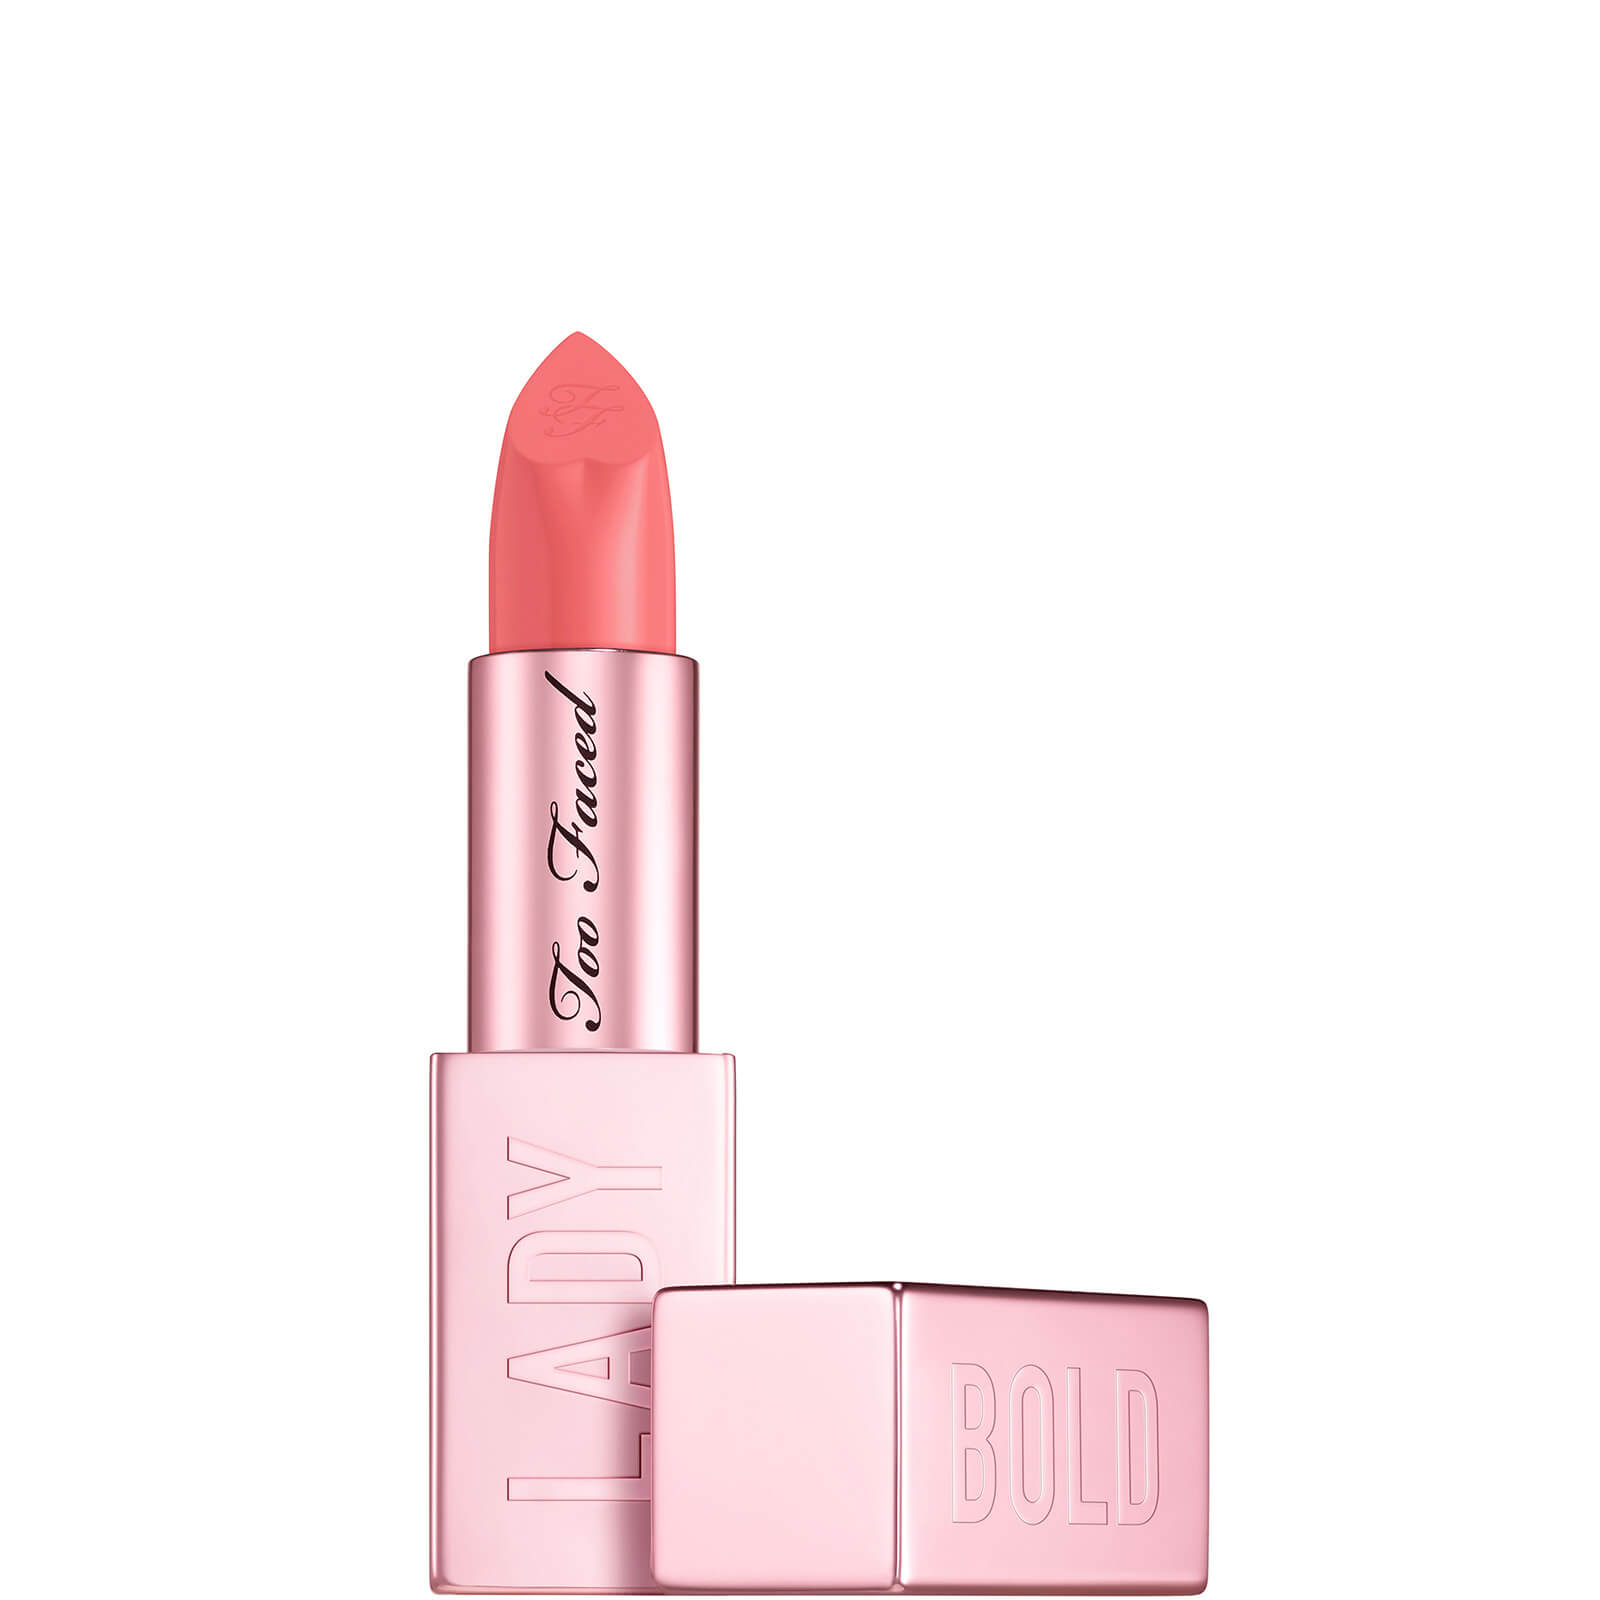 Too Faced Lady Bold Em-Power Pigment Lipstick 4g (Various Shades) - Level Up